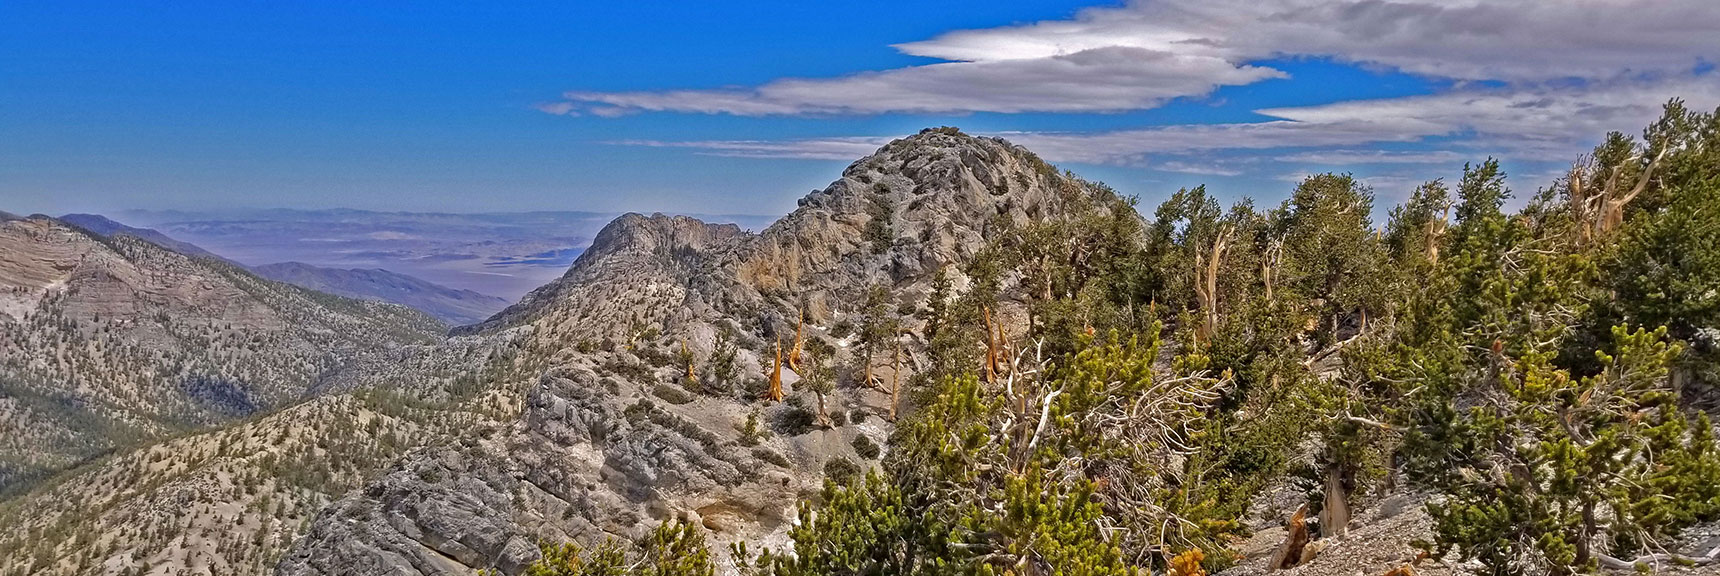 View Toward The Sisters South Western Summit. Macks Peak in Background. | The Sisters South | Lee Canyon | Mt Charleston Wilderness | Spring Mountains, Nevada